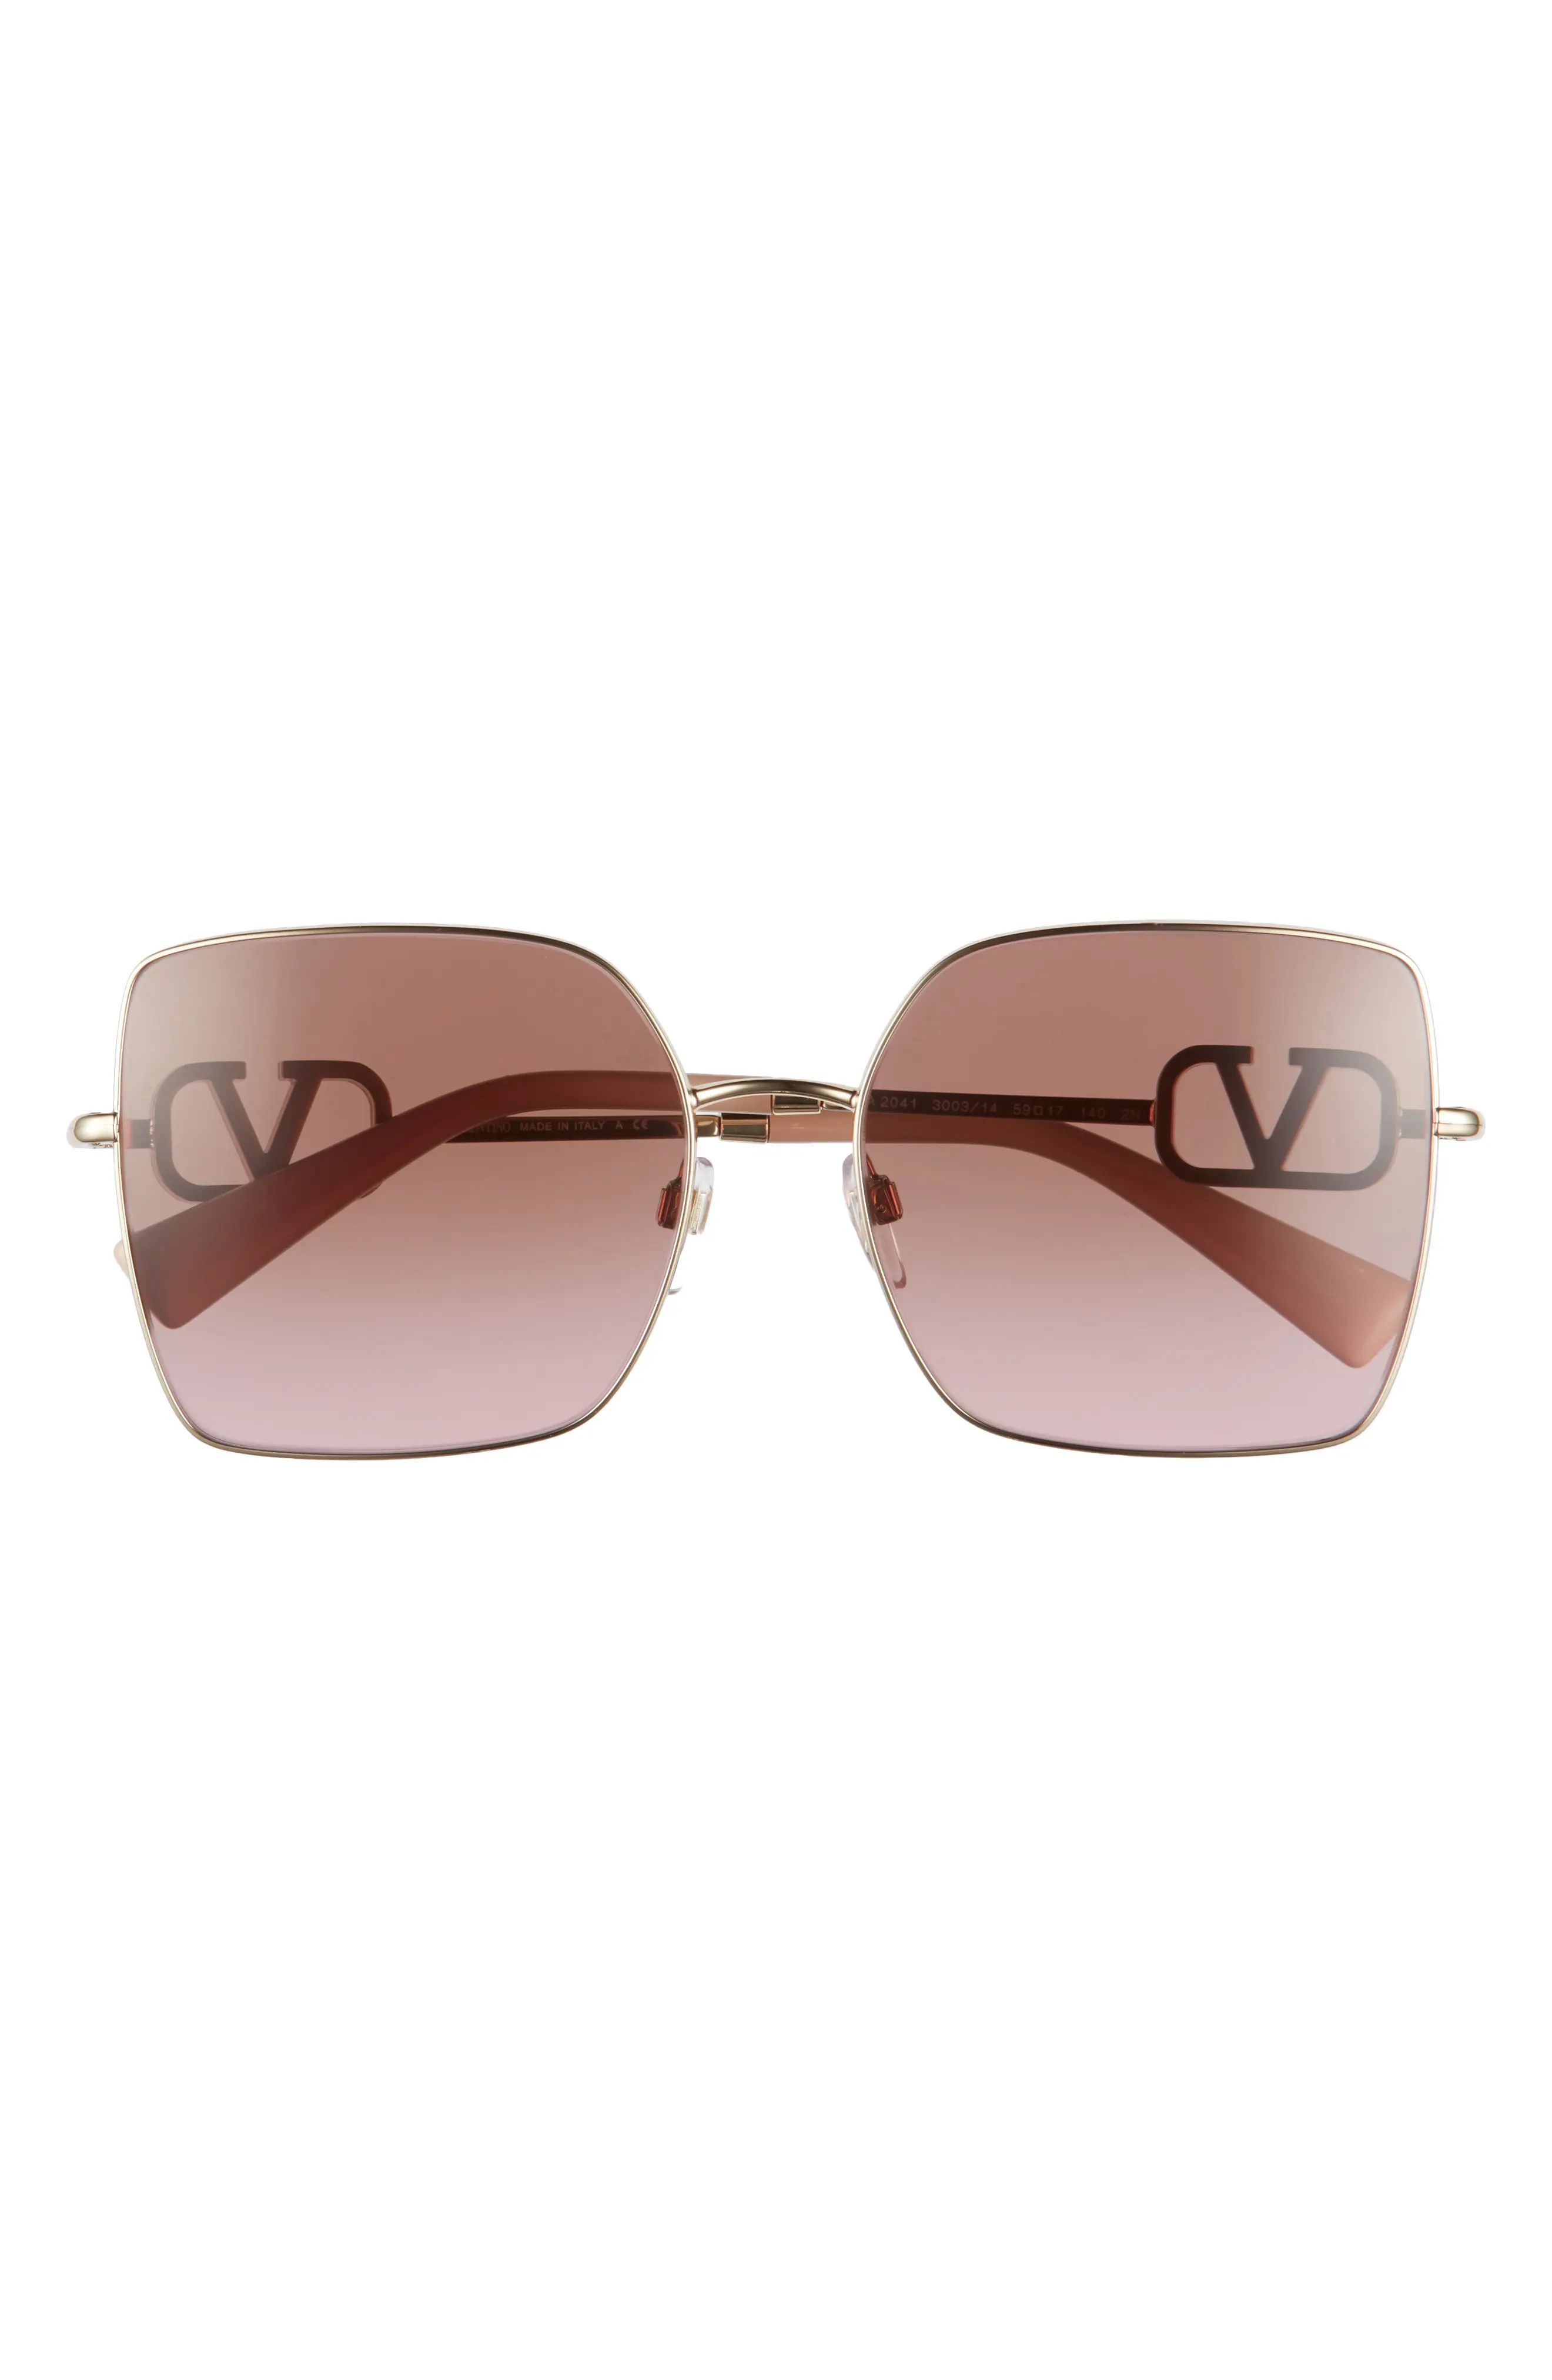 Valentino 59mm Gradient Square Sunglasses in Pale Gold/Brown Pink Gradient at Nordstrom | Nordstrom